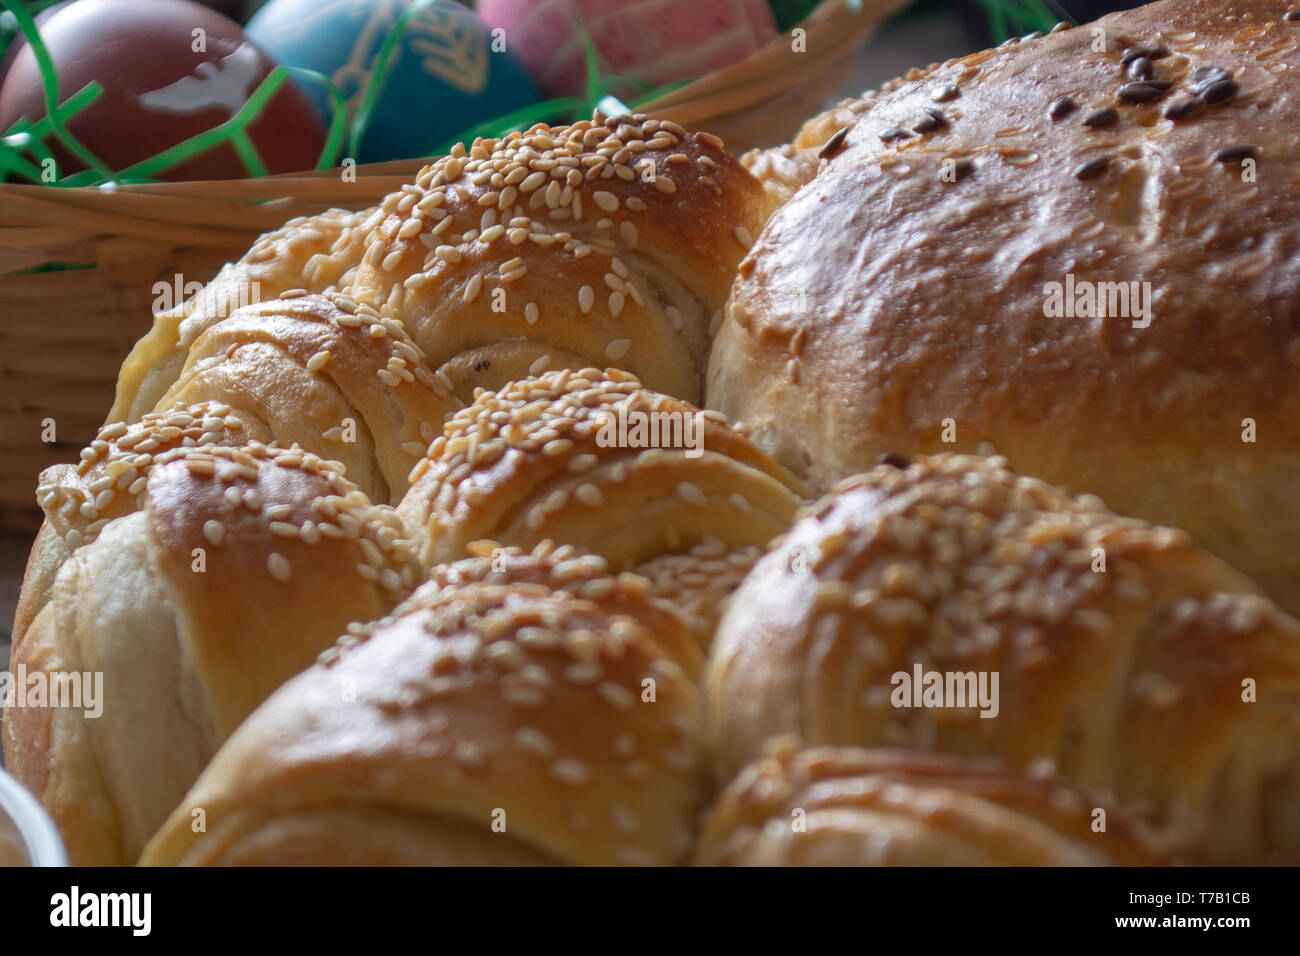 Table ful of food on easter holyday. Colored eggs and bread Stock Photo